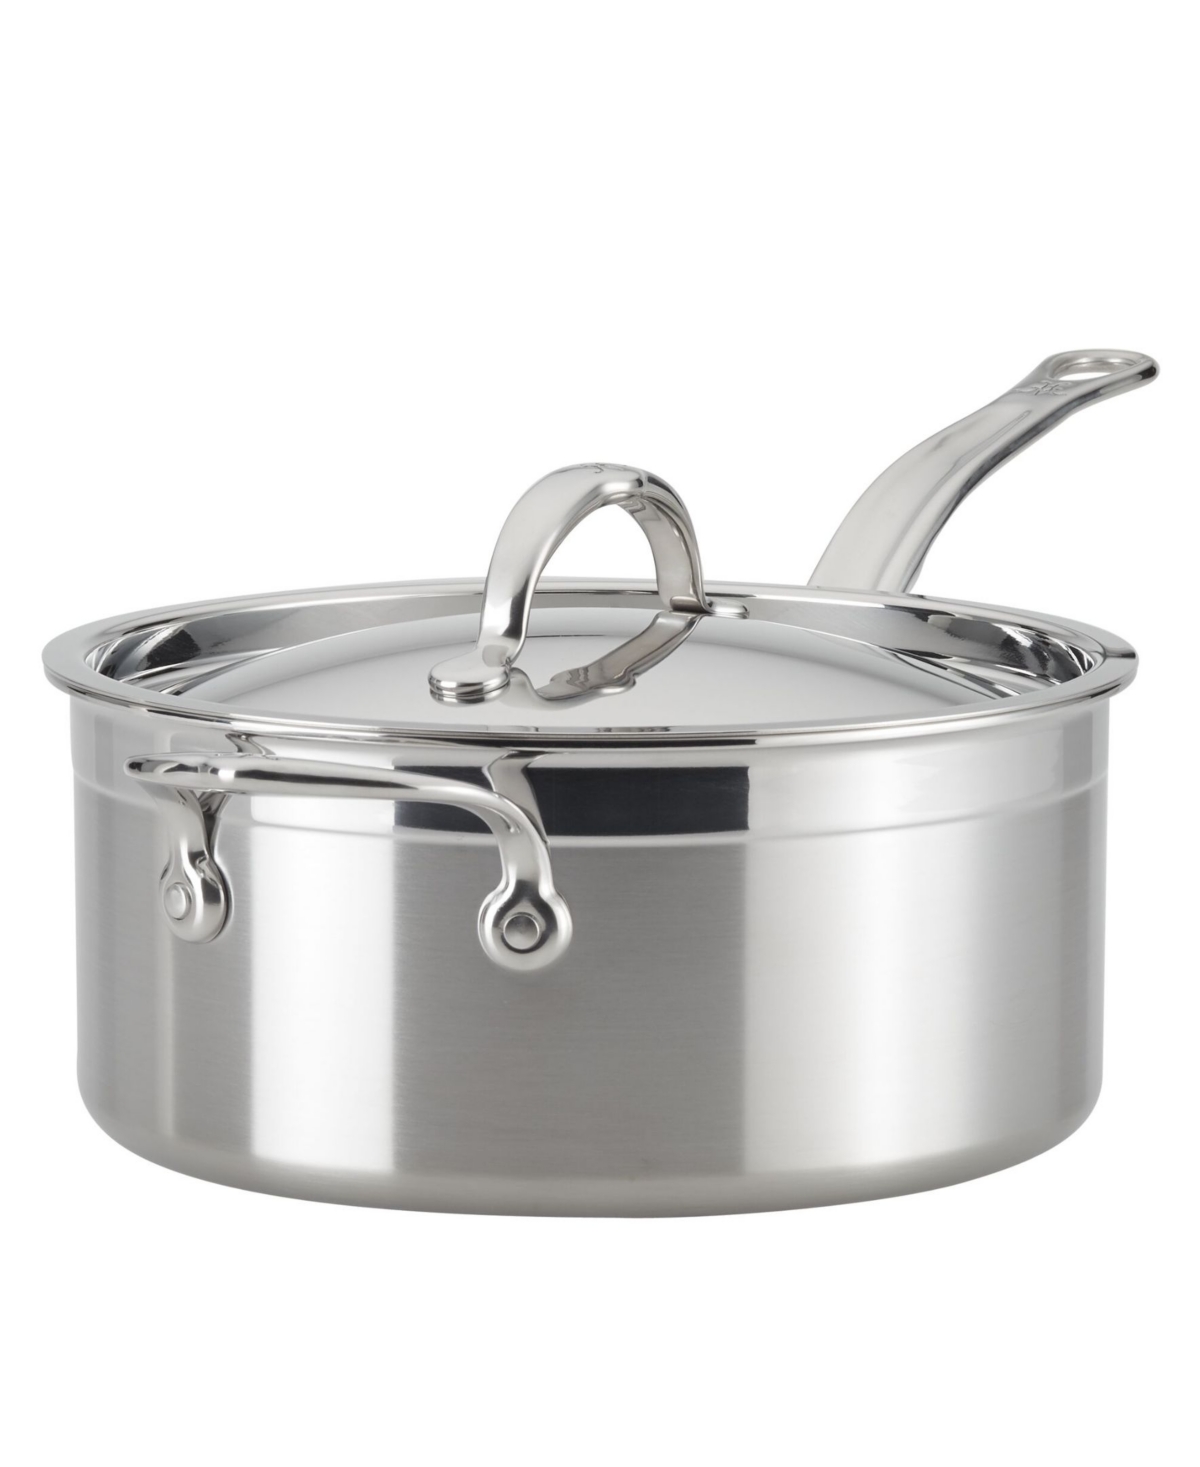 Hestan Probond Clad Stainless Steel 4-quart Covered Saucepan With Helper Handle In Silver